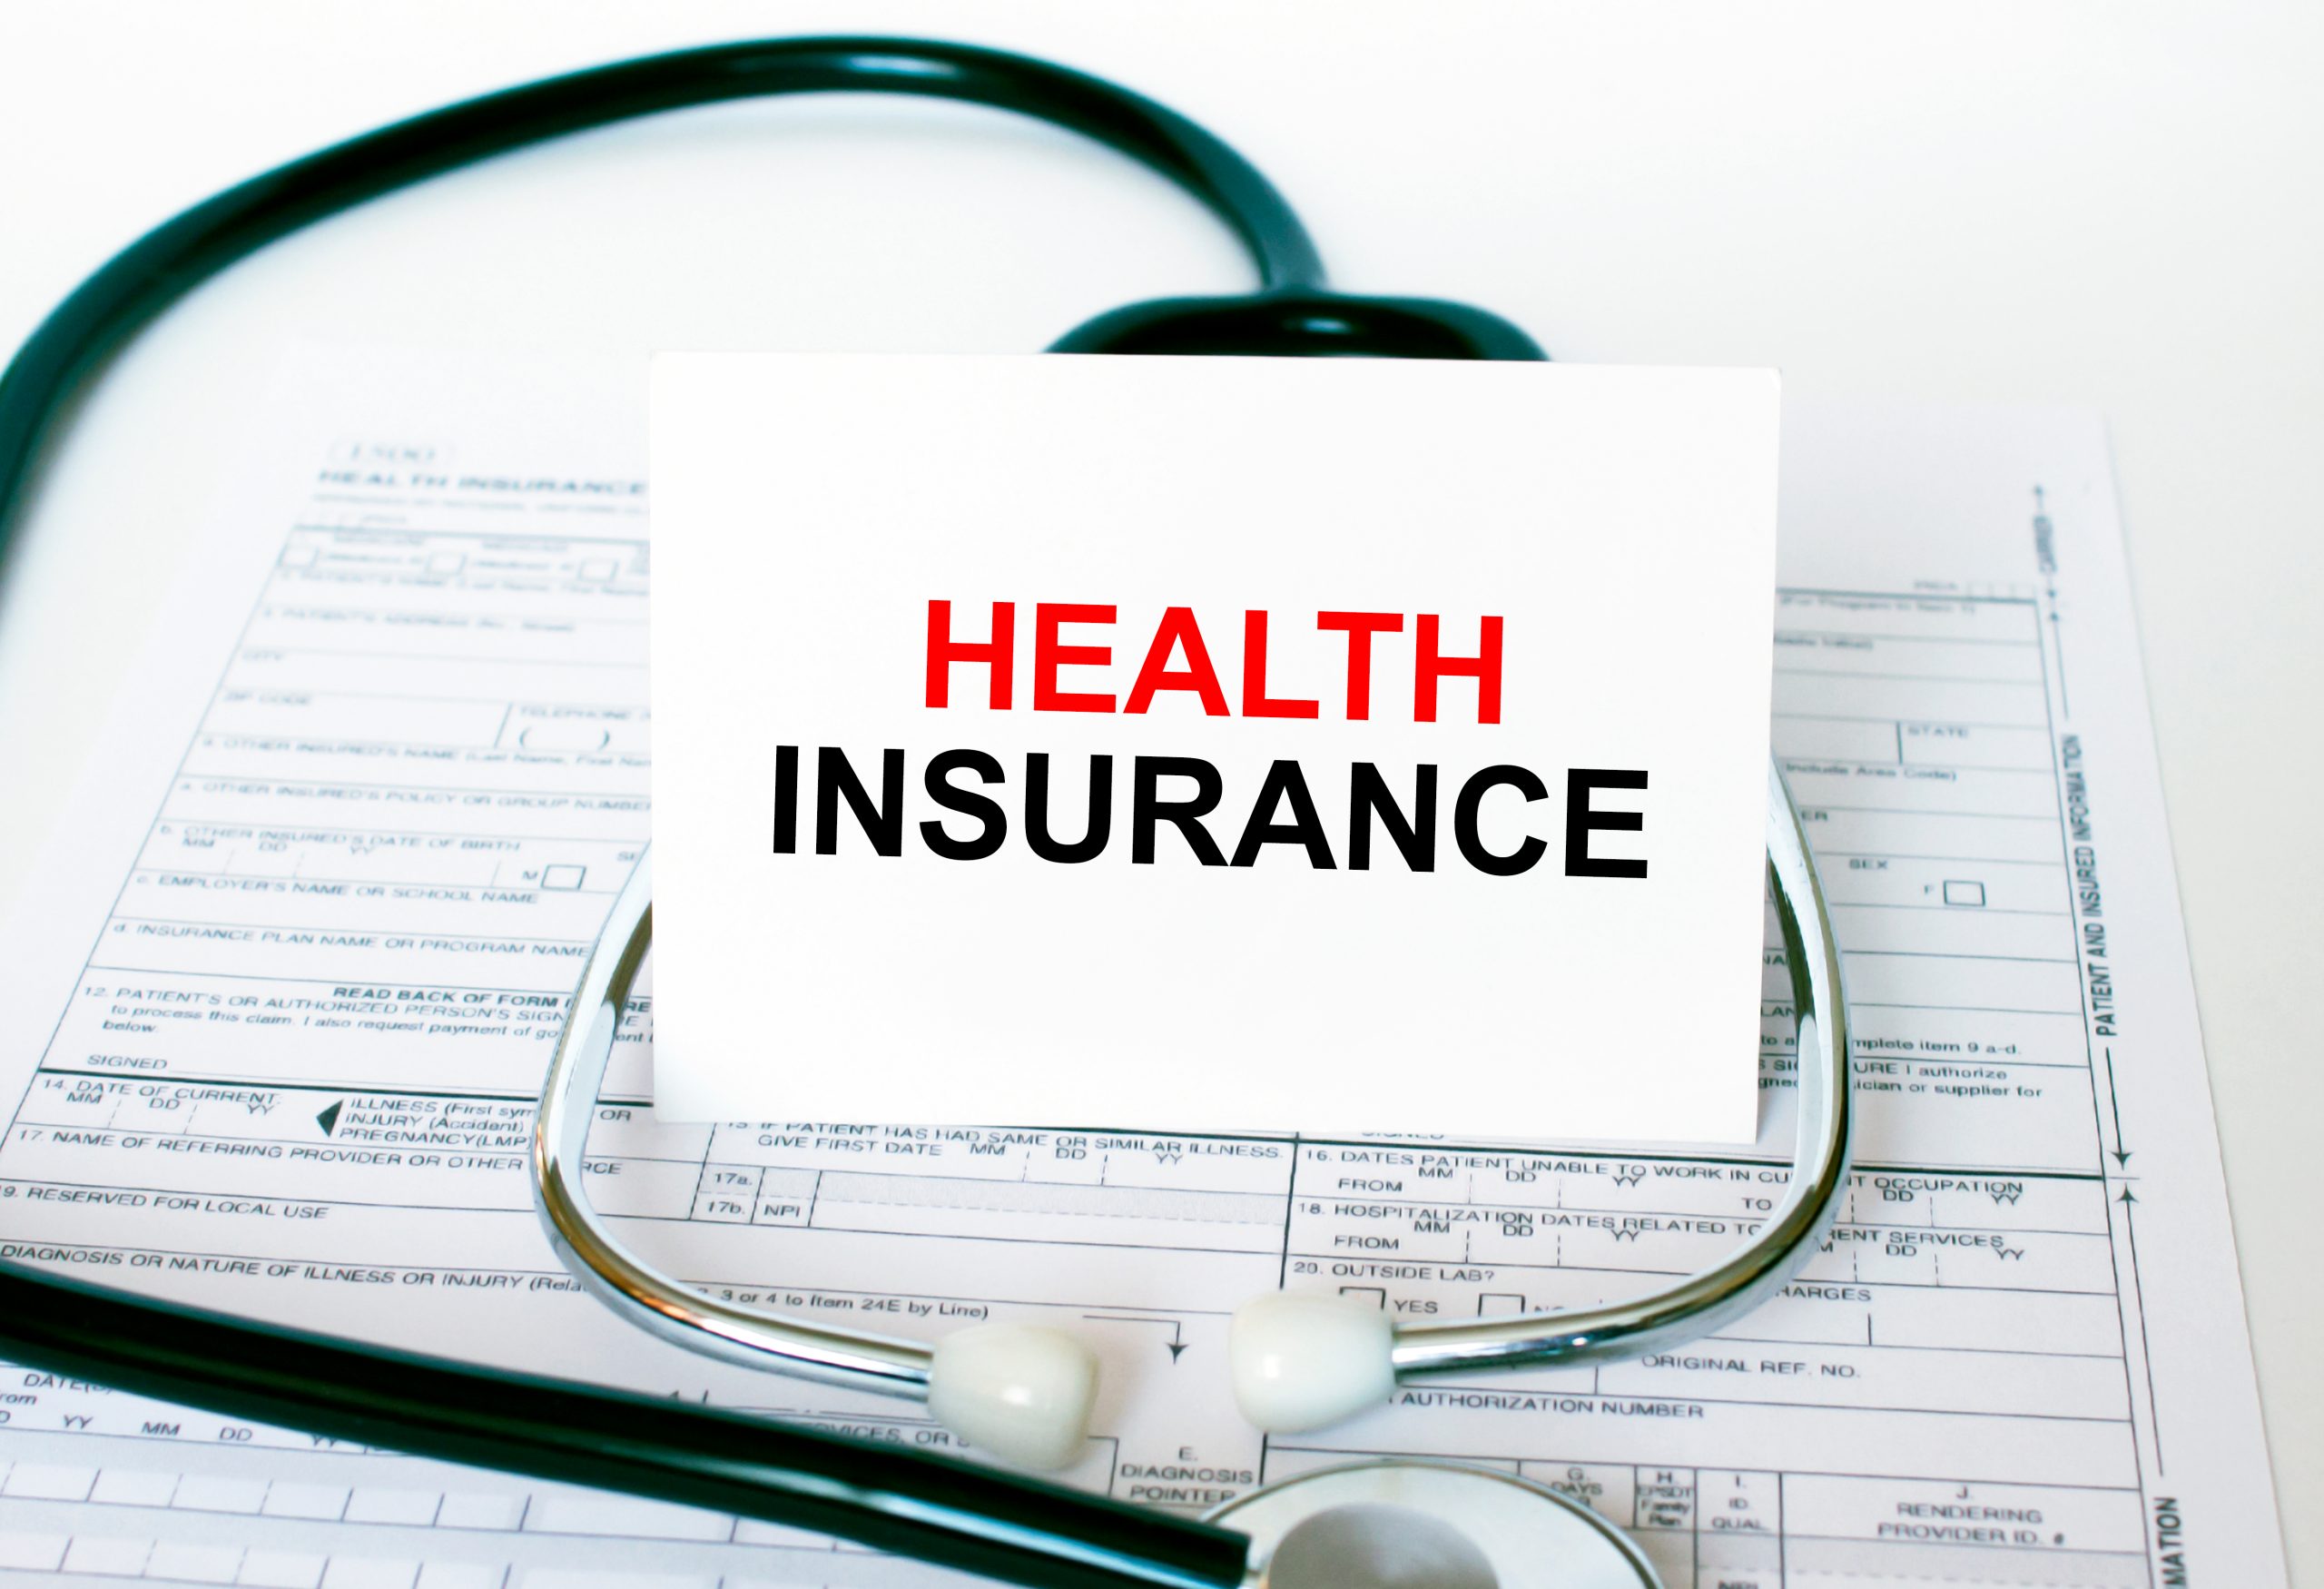 What Are Health Insurance Marketplaces?